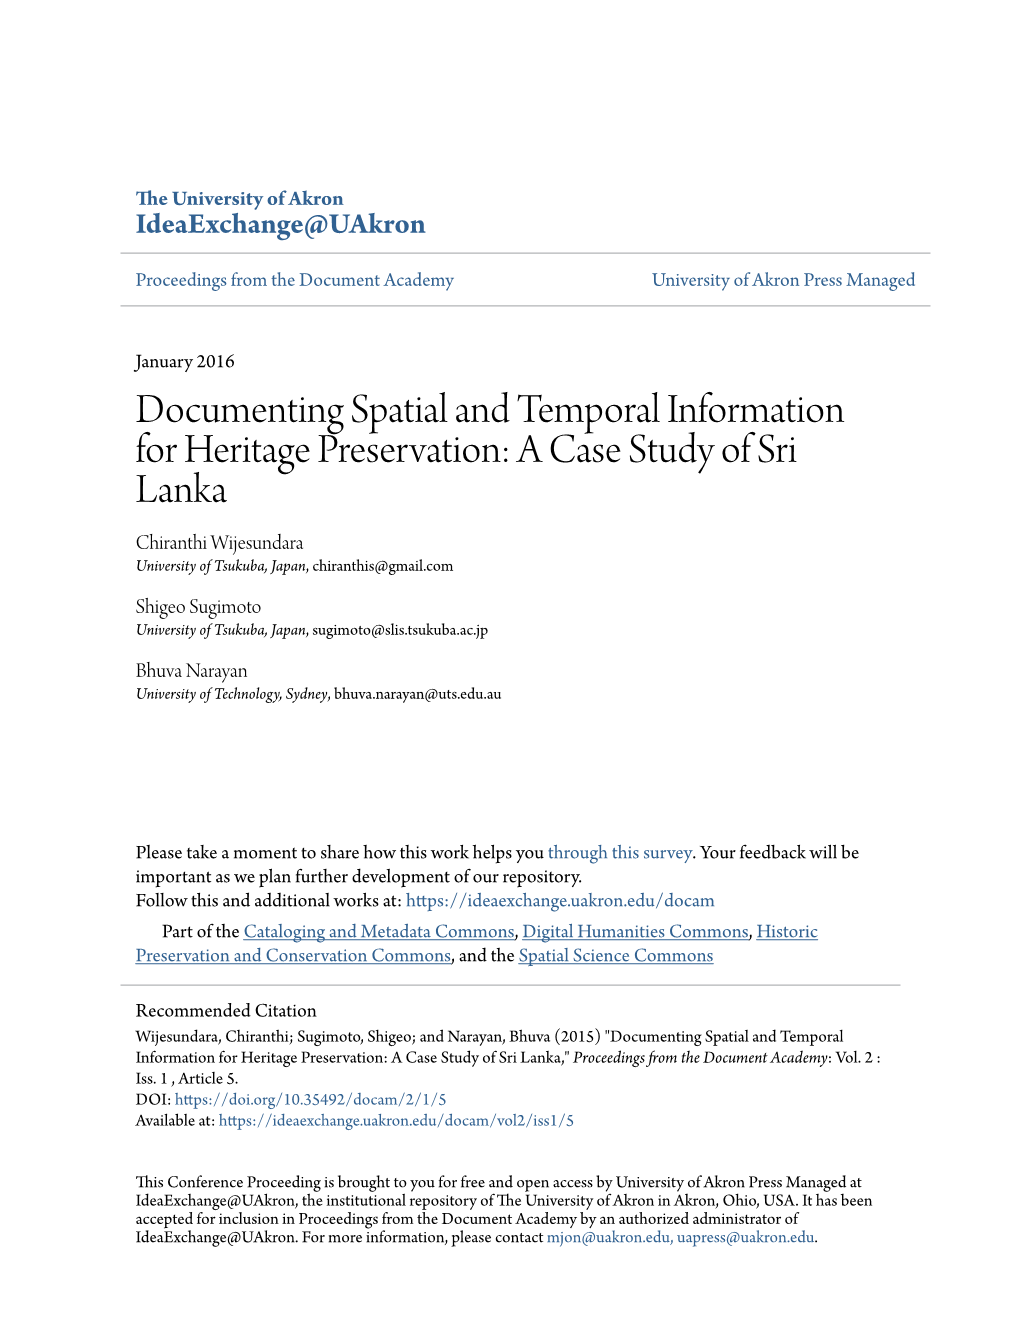 Documenting Spatial and Temporal Information for Heritage Preservation